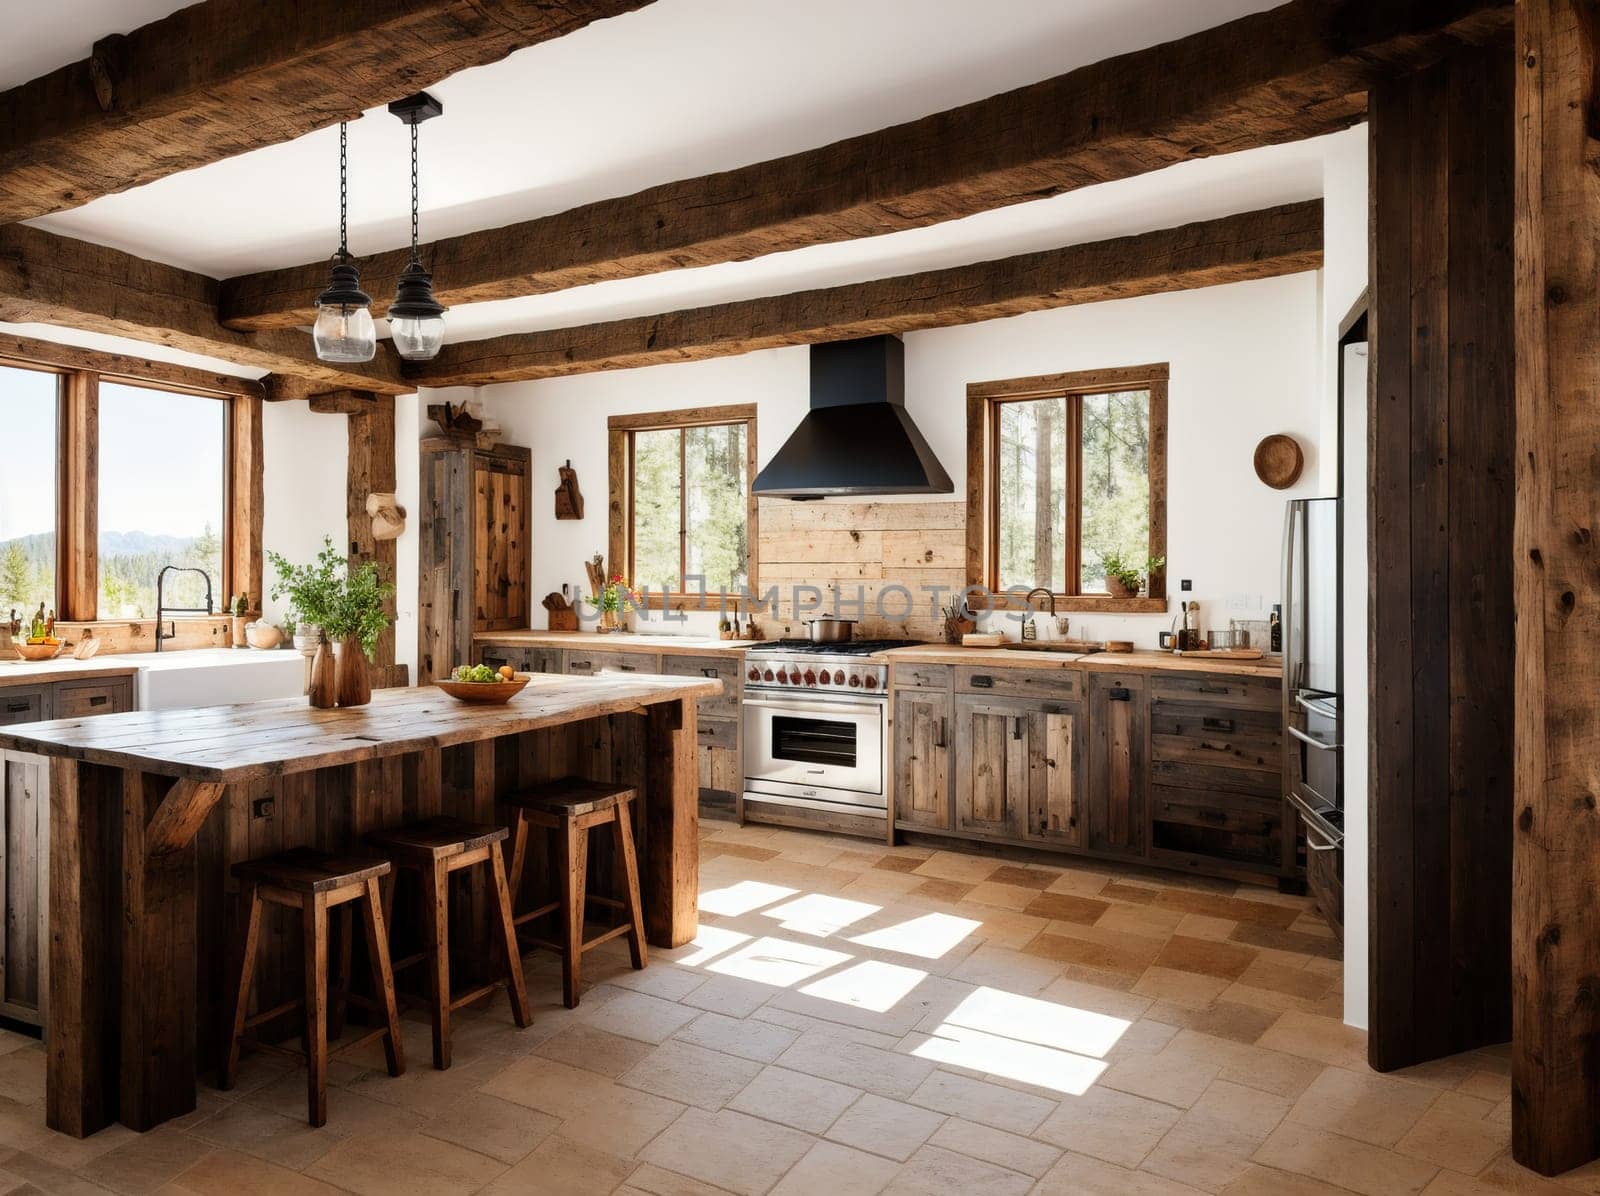 The image shows a large kitchen with wooden beams on the ceiling, wooden floors, and a large wooden island in the center of the room.